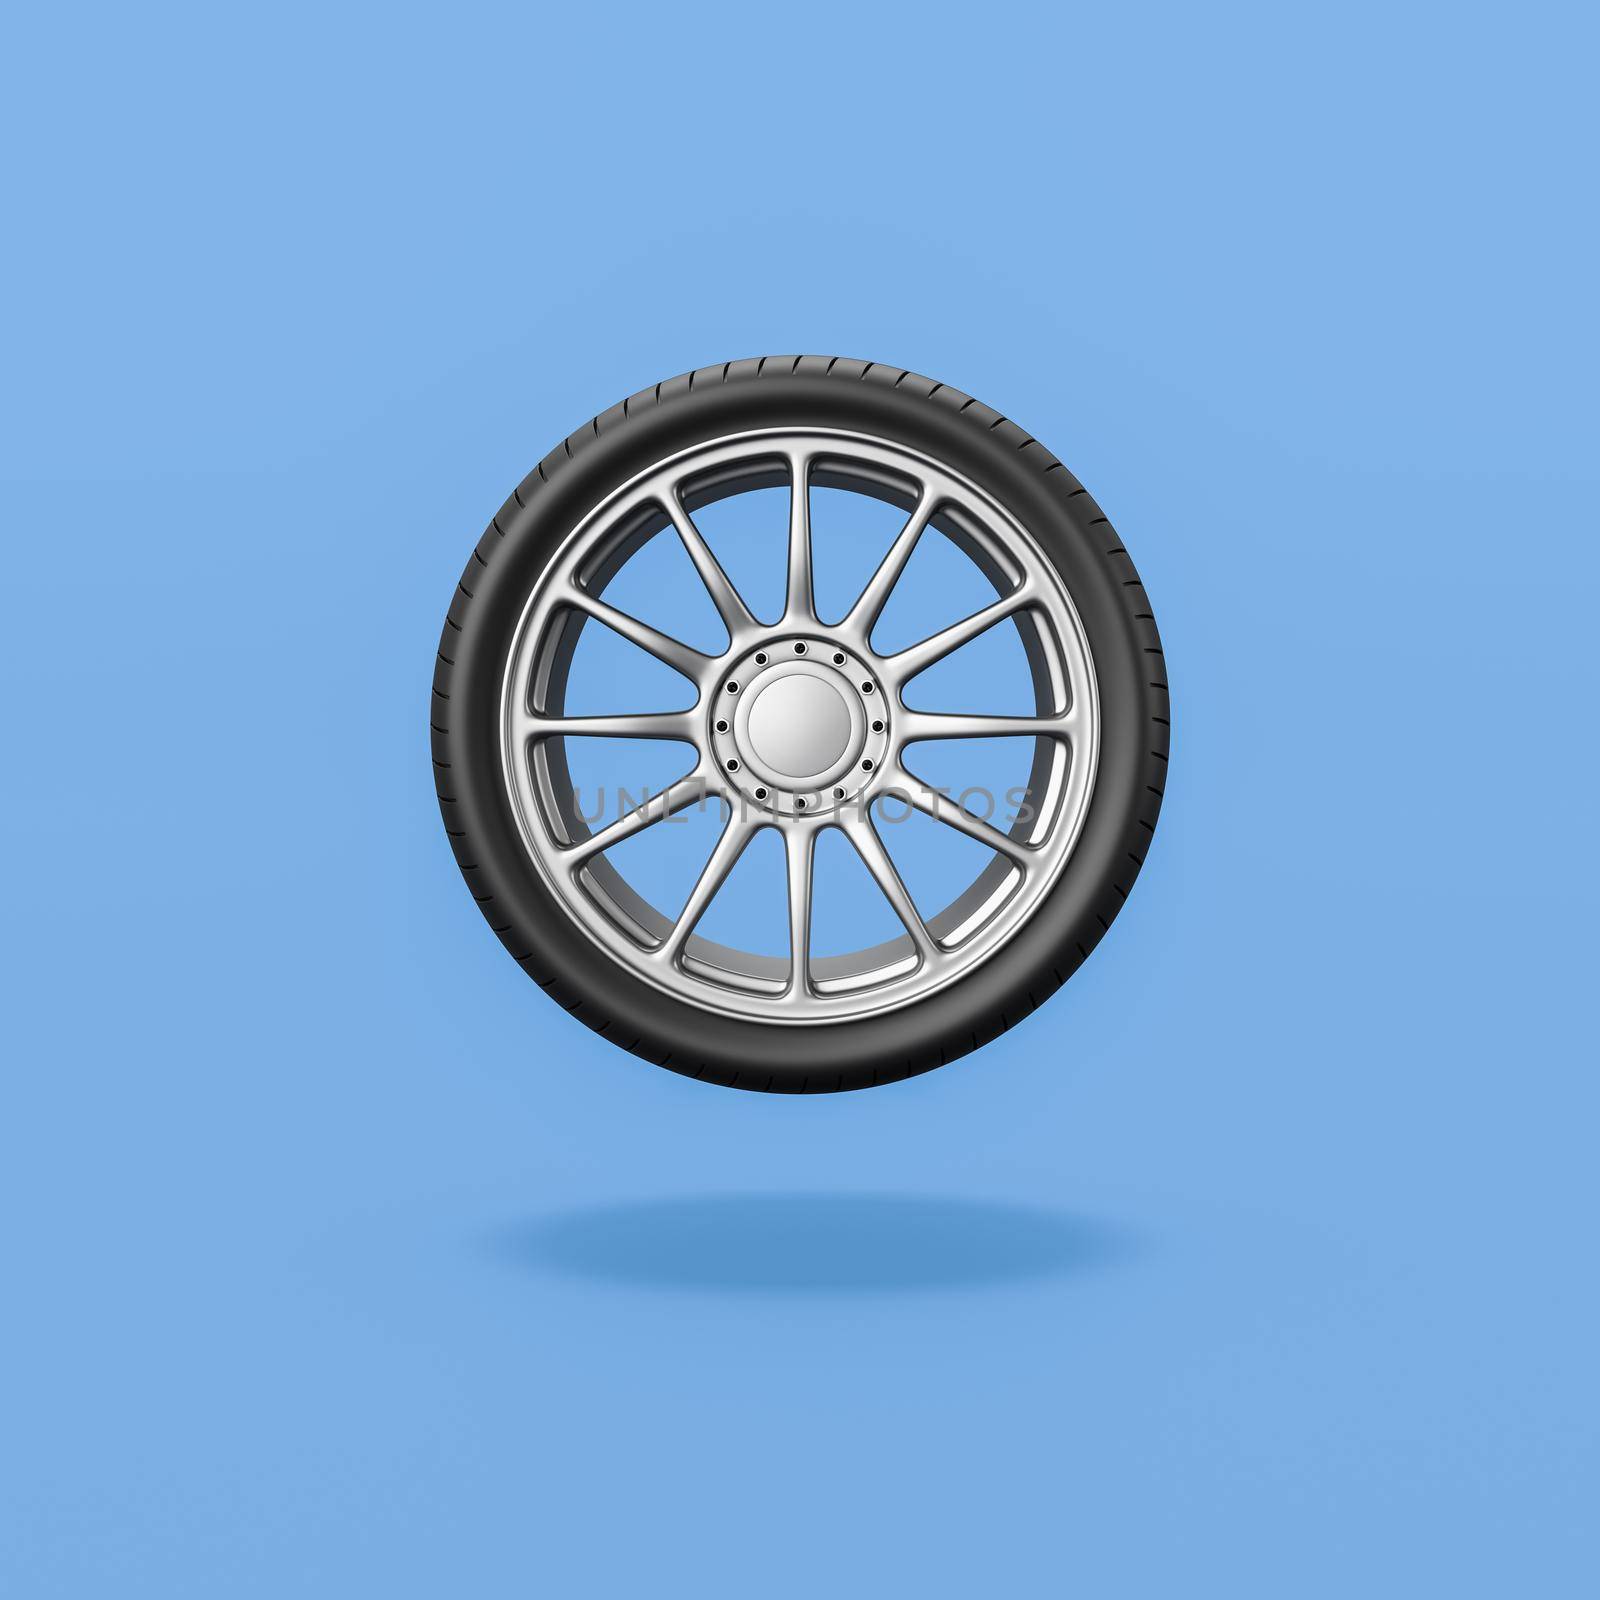 Single Car Wheel Isolated on Flat Blue Background with Shadow 3D Illustration